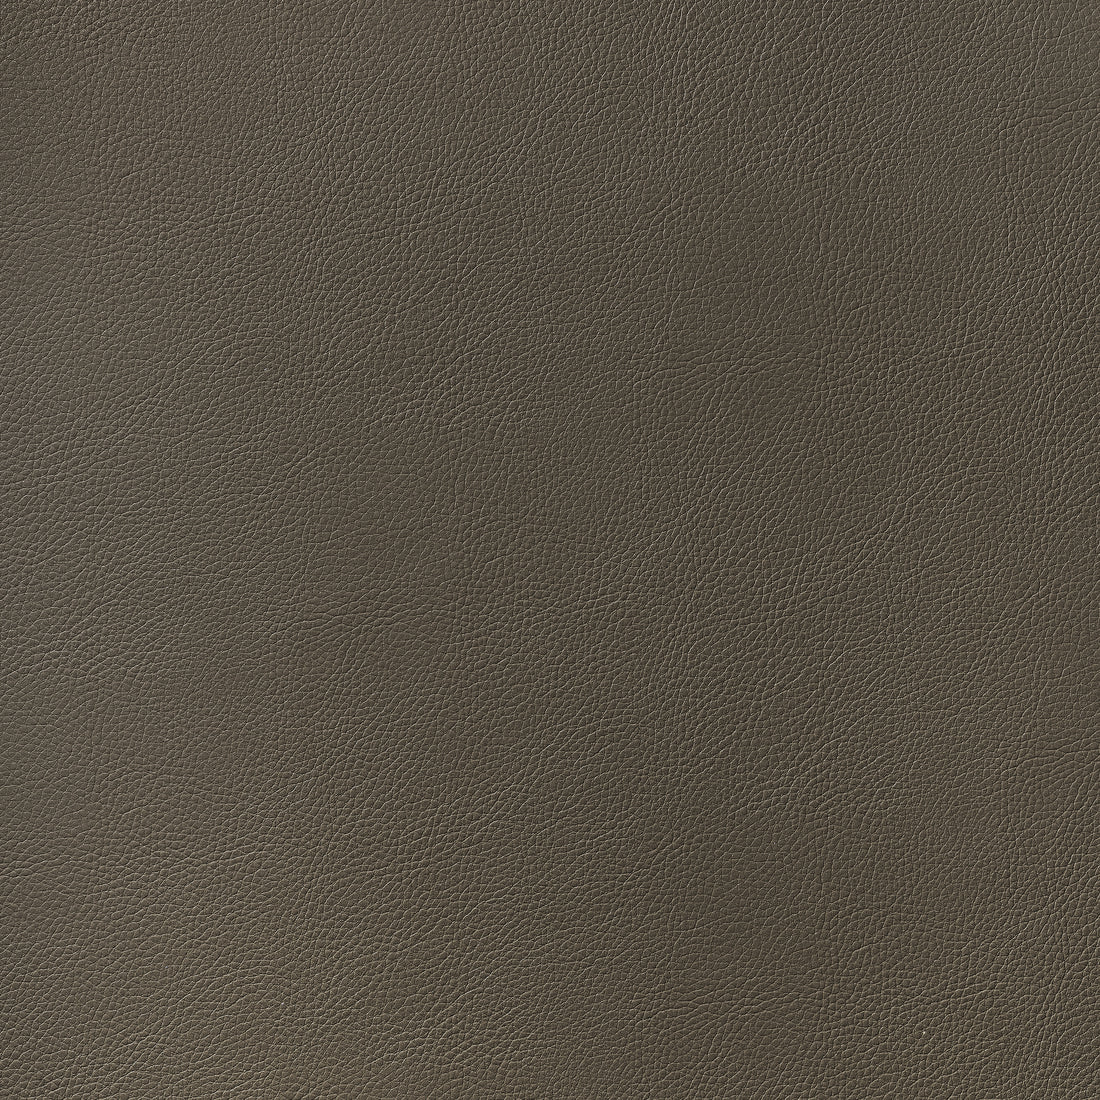 Arcata fabric in bark color - pattern number W78397 - by Thibaut in the  Sierra collection